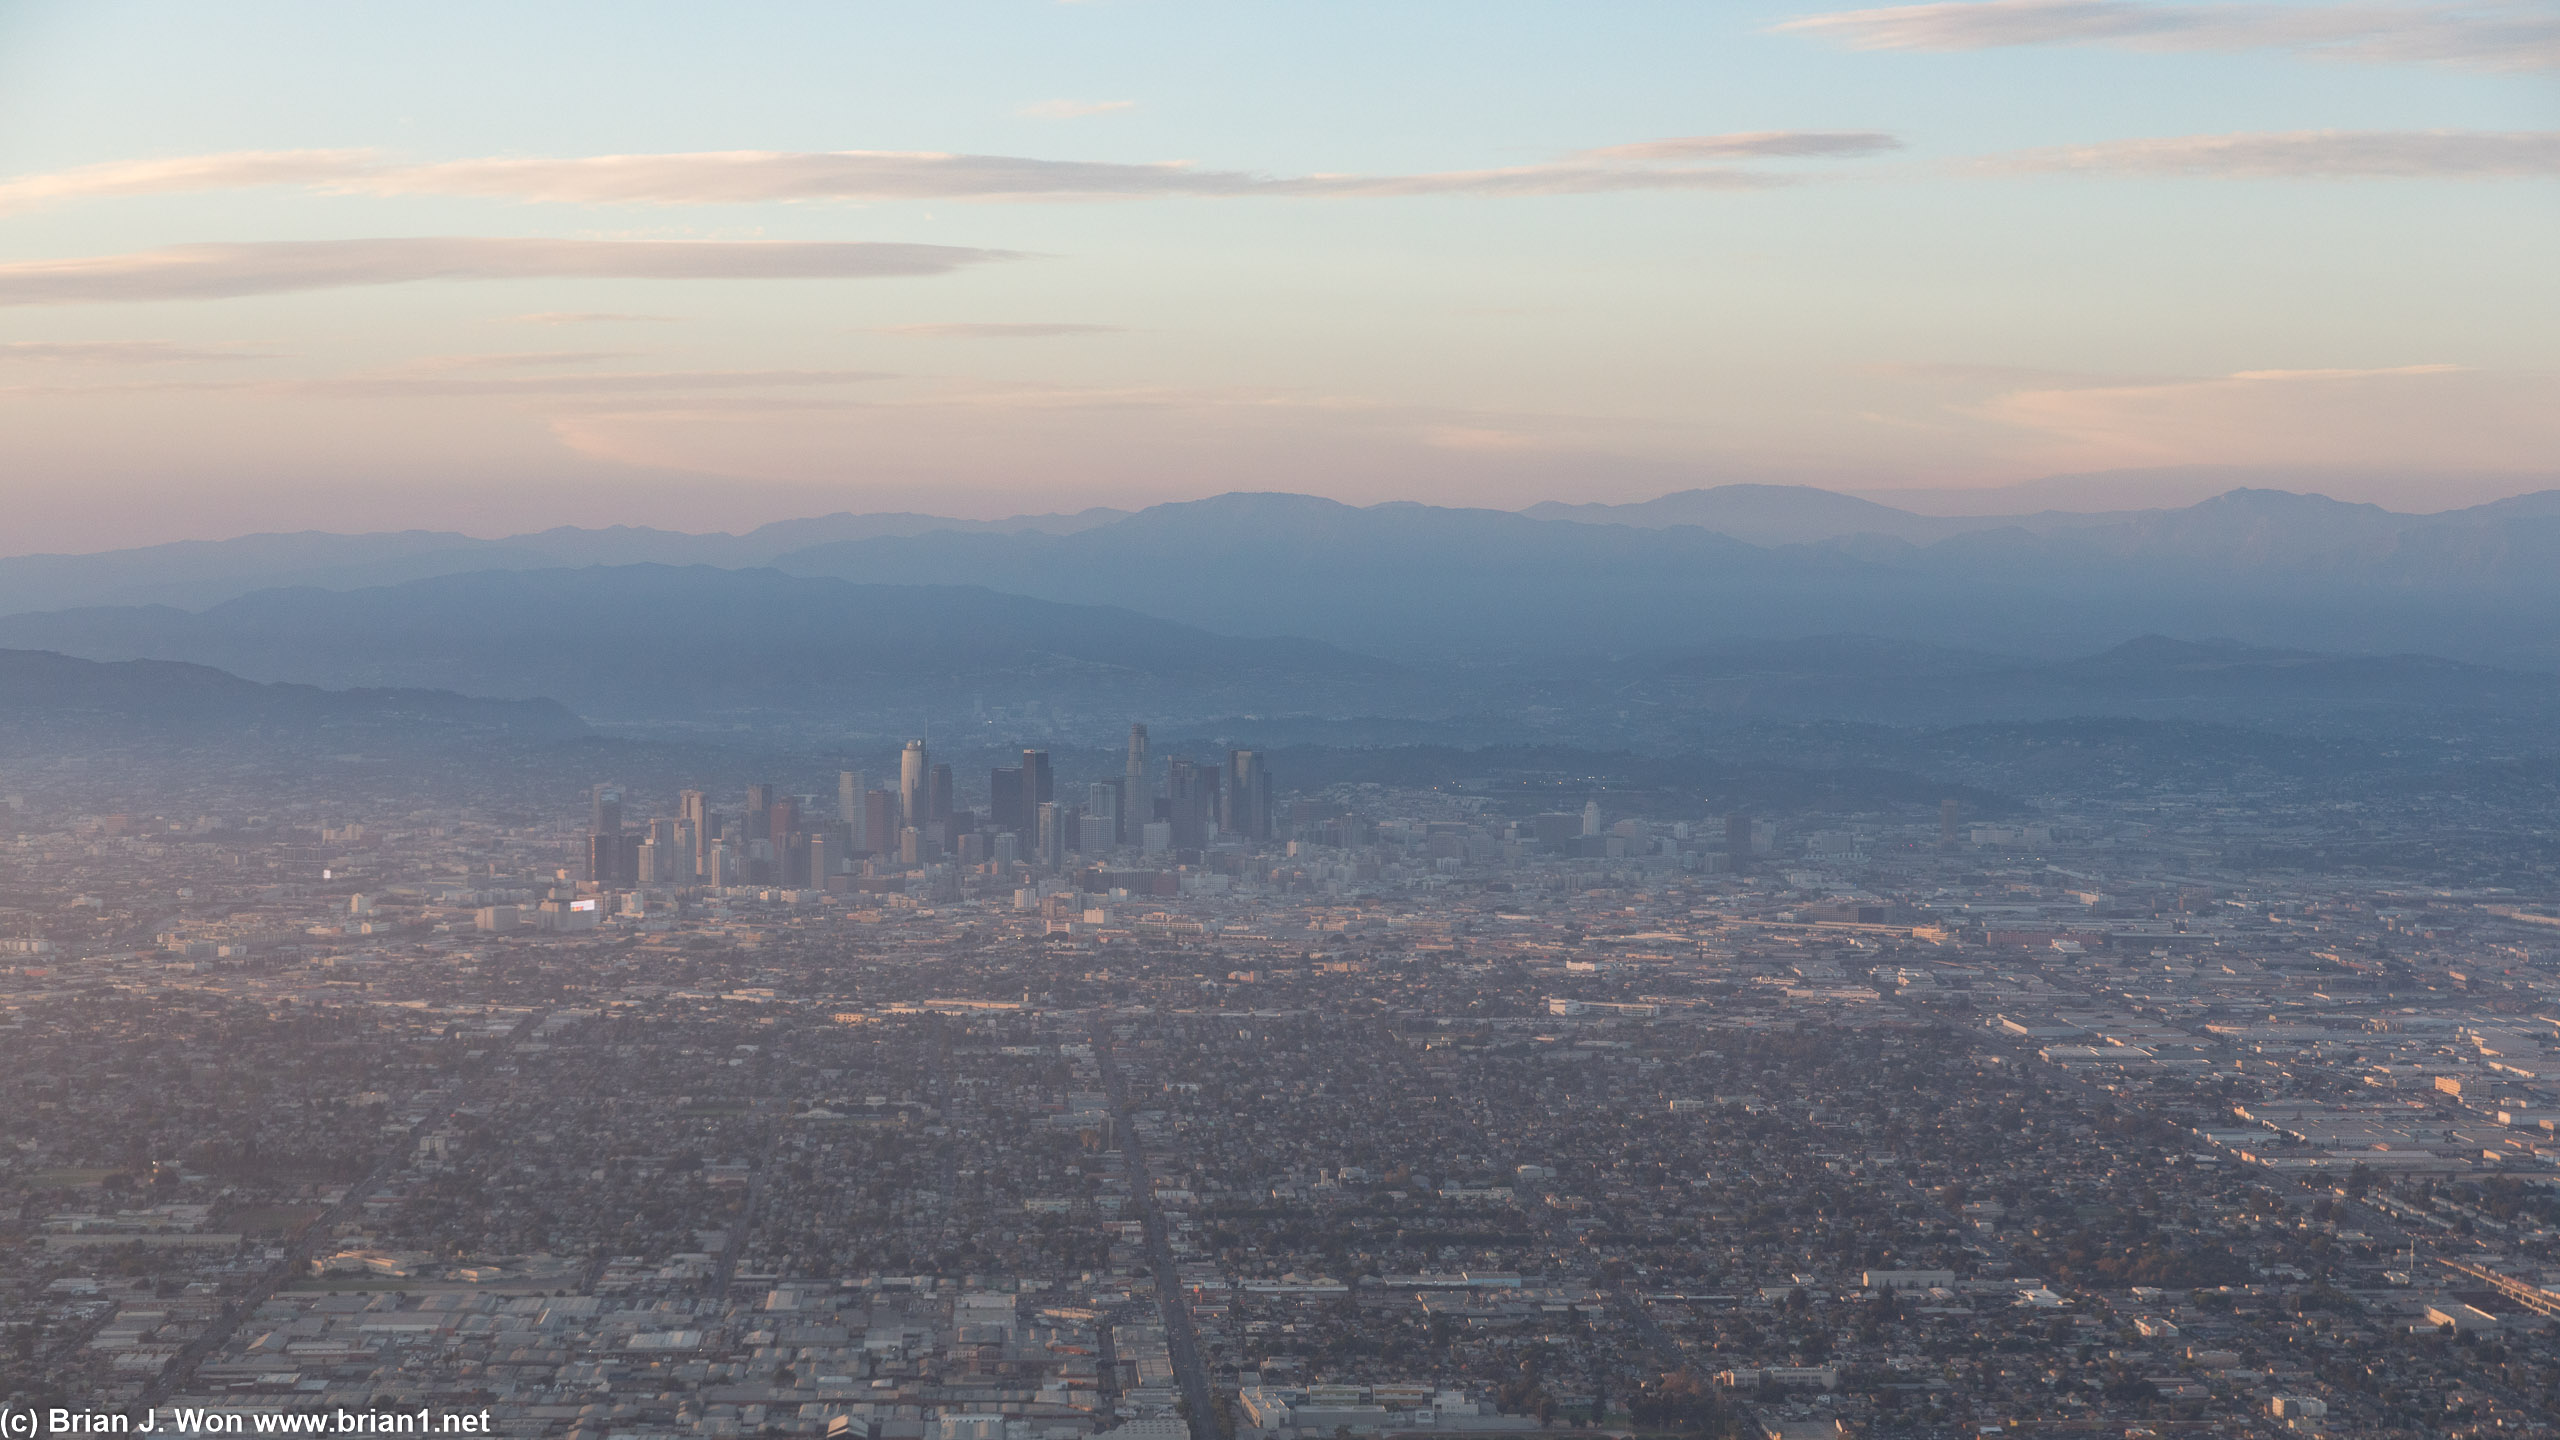 Passing by downtown Los Angeles on final approach to LAX.